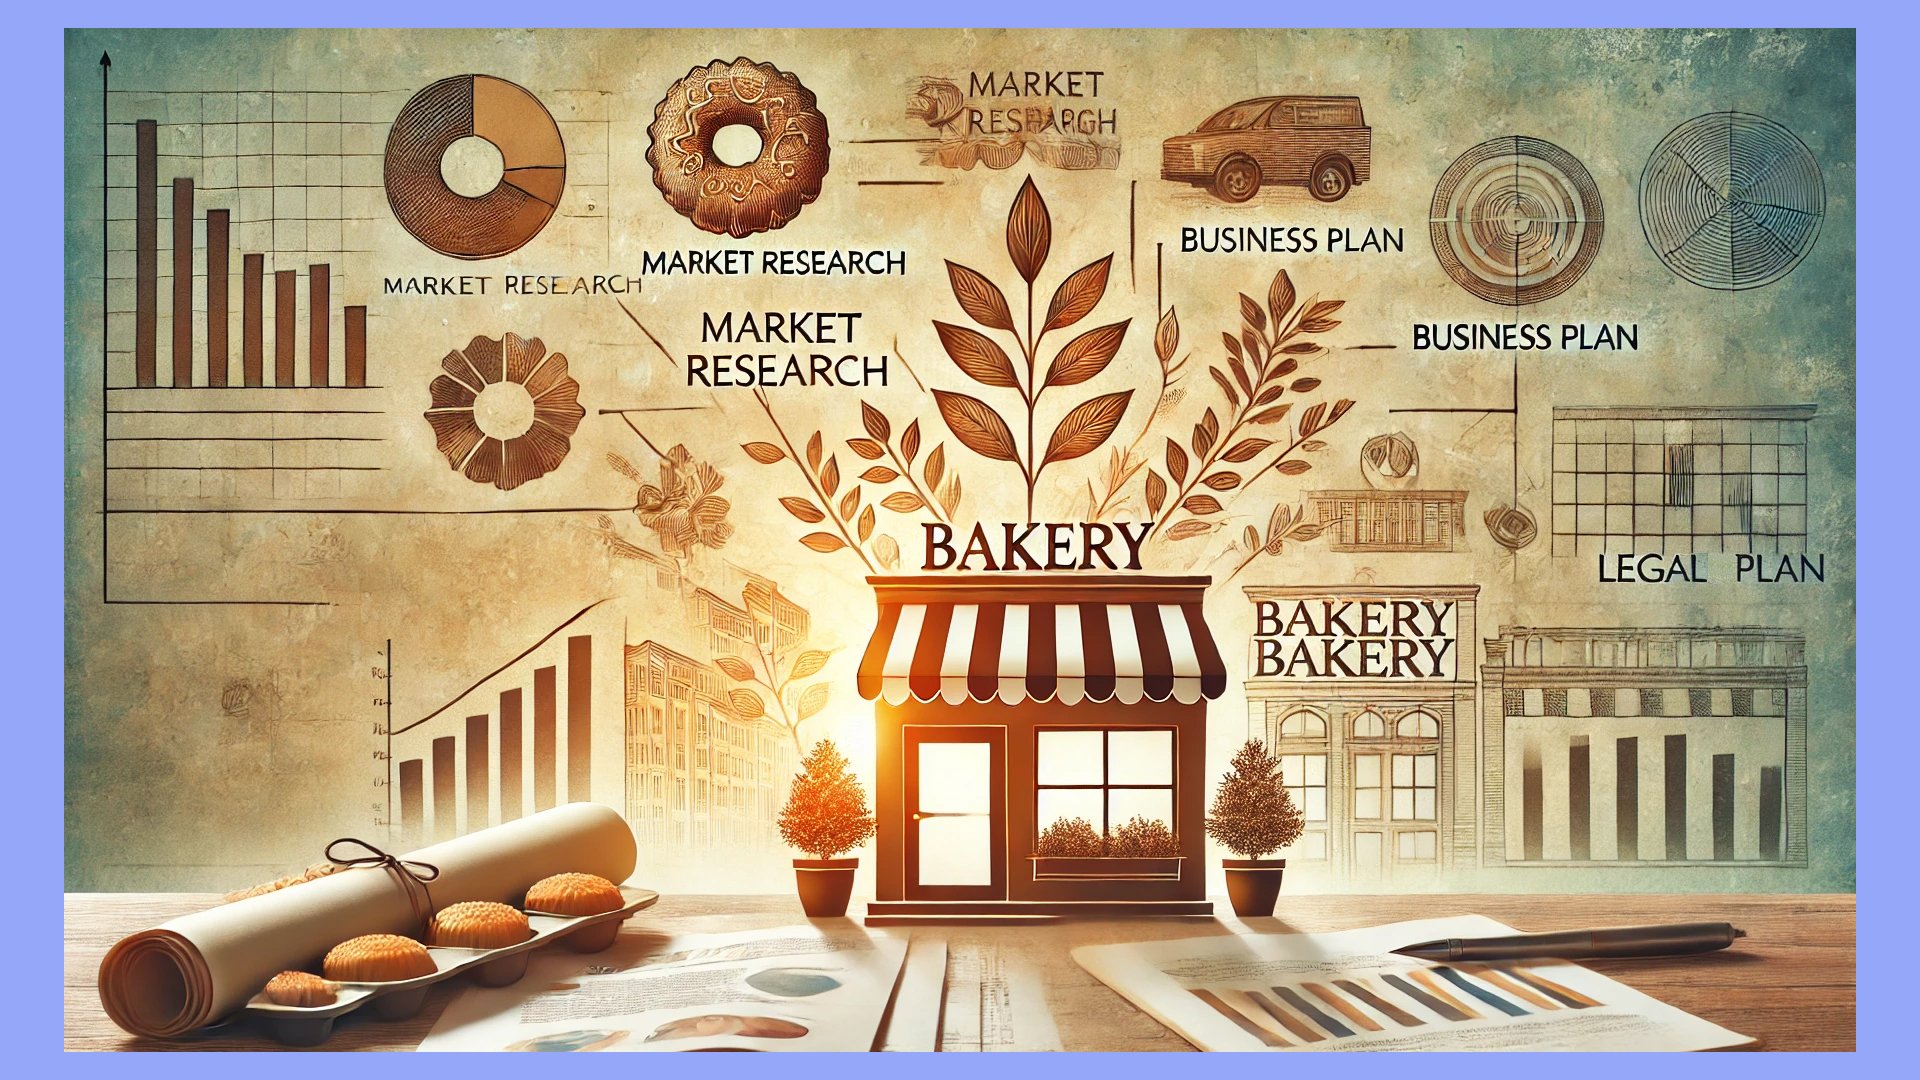 An illustration depicting how to start a baking business.